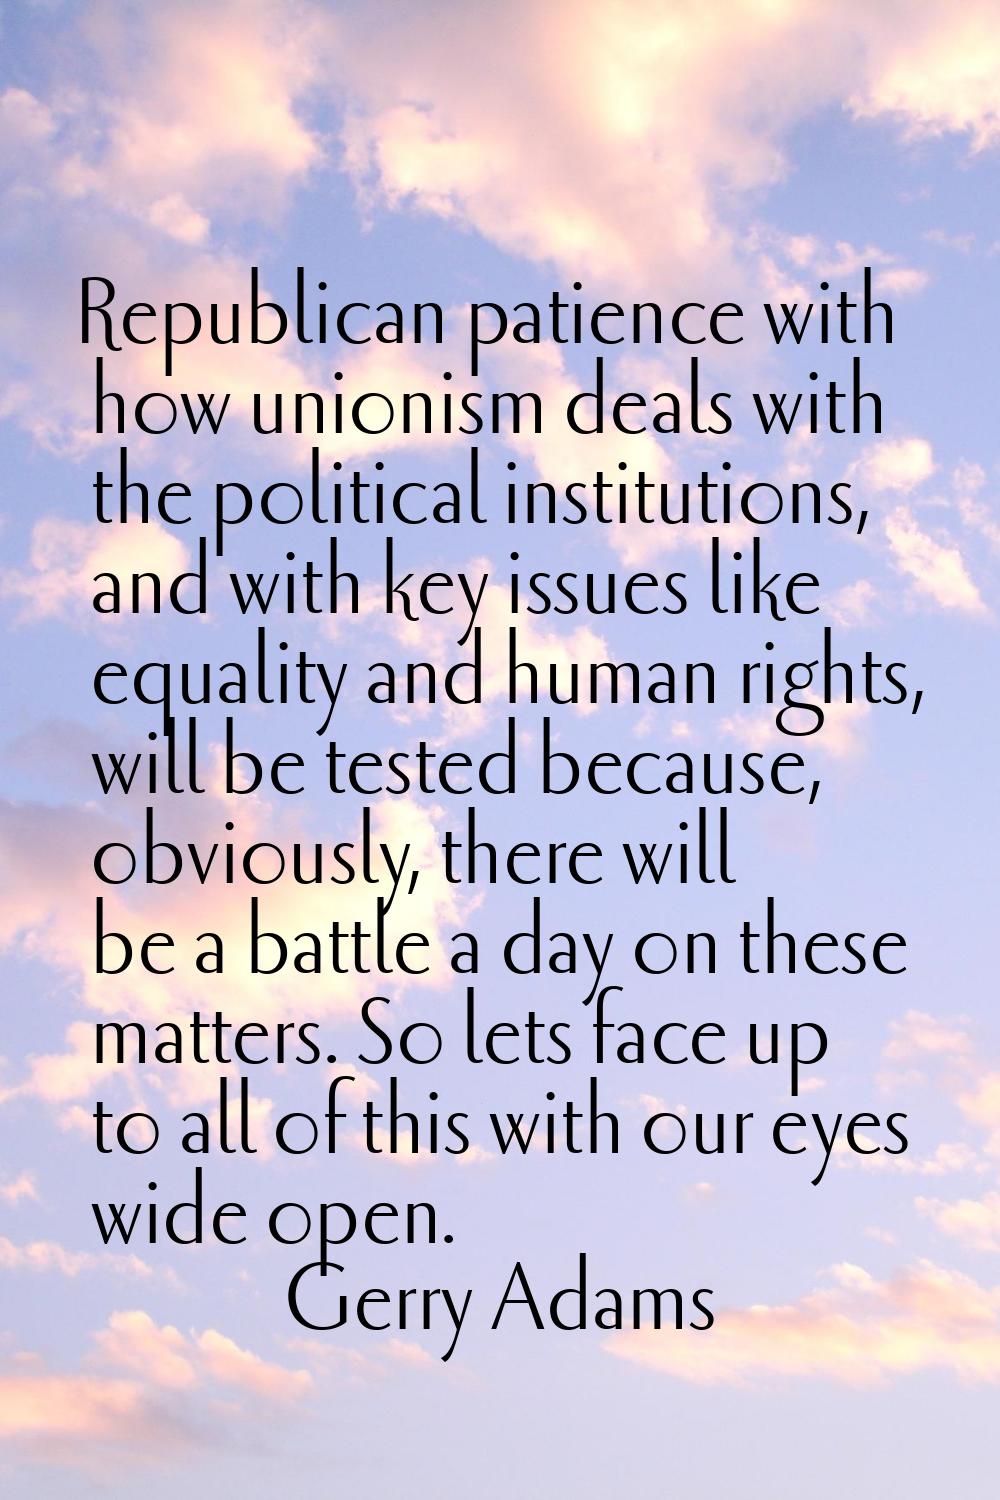 Republican patience with how unionism deals with the political institutions, and with key issues li